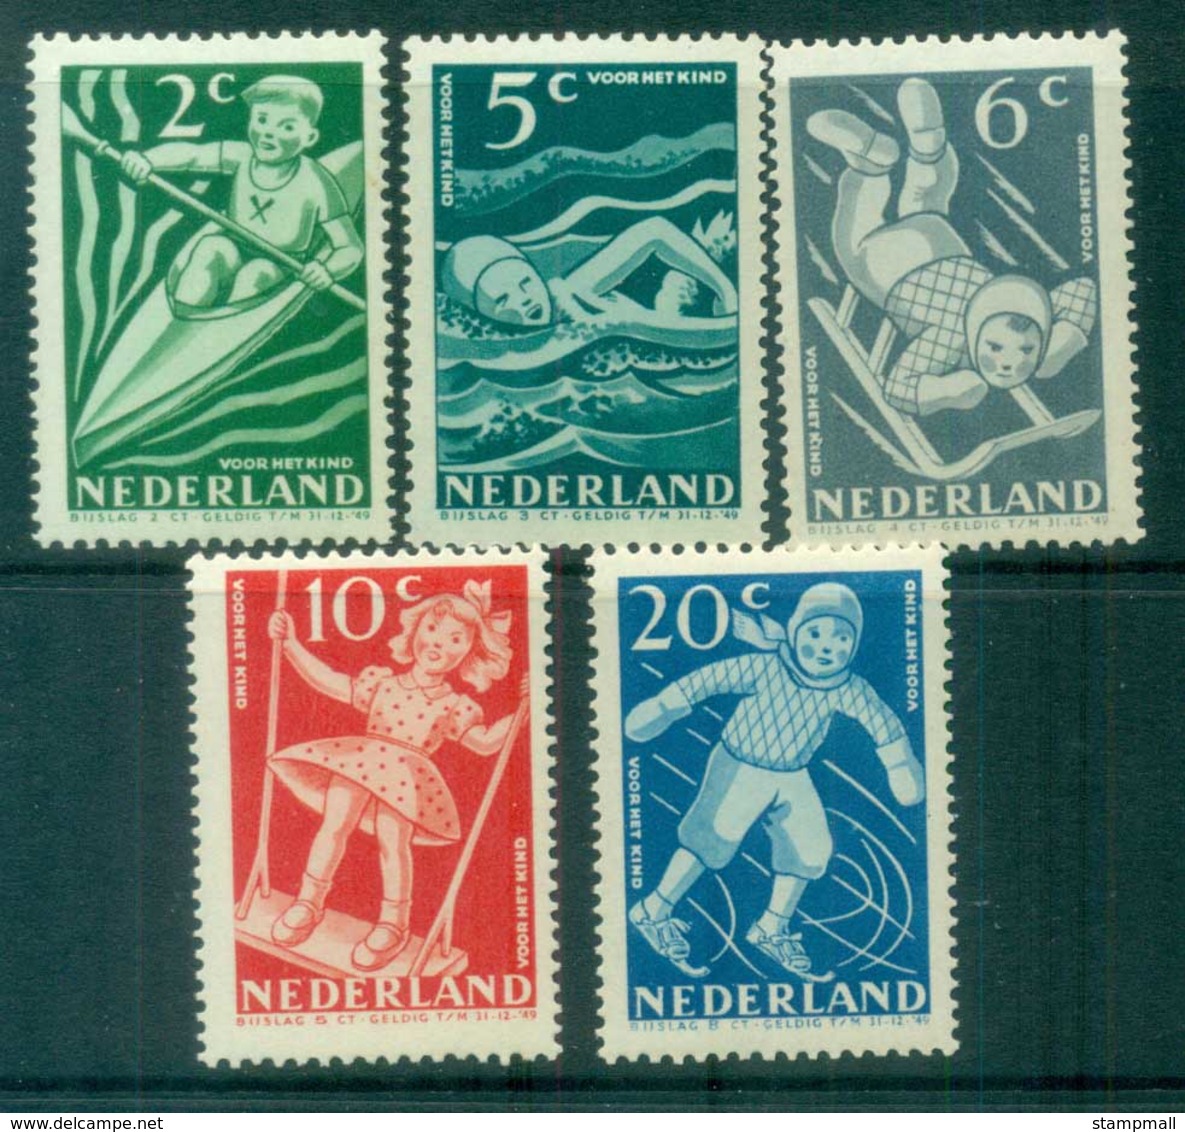 Netherlands 1948 Charity, Child Welfare MLH Lot76488 - Unclassified